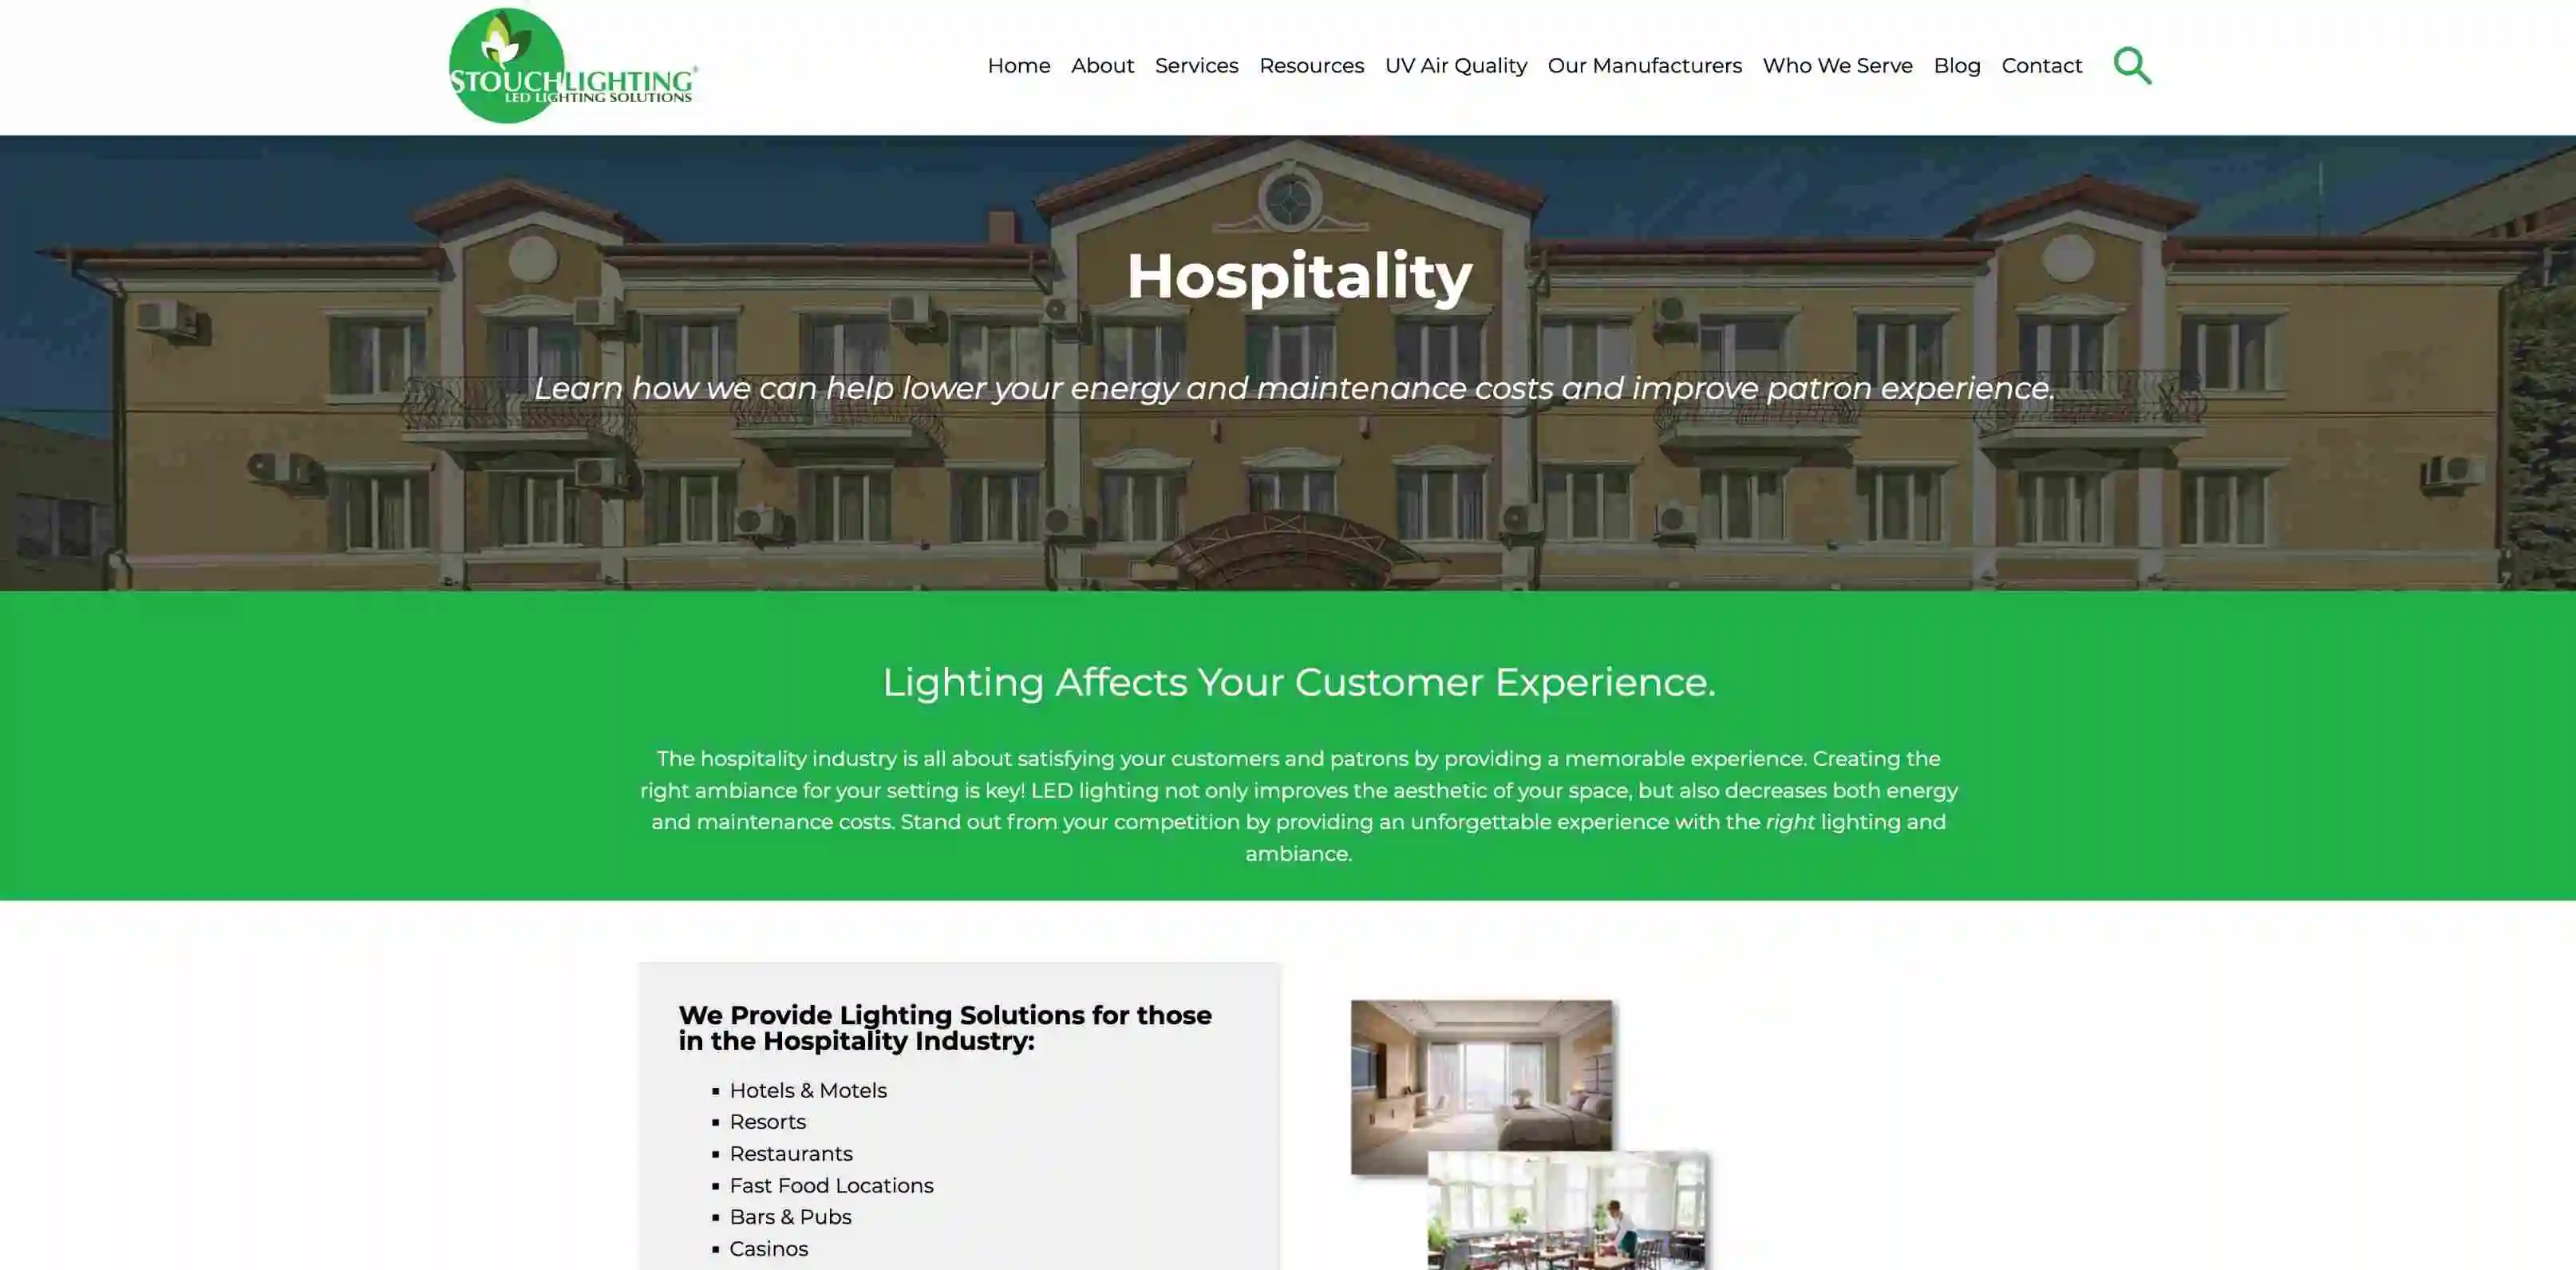 Website design for a hotel by Stouch Lighting company